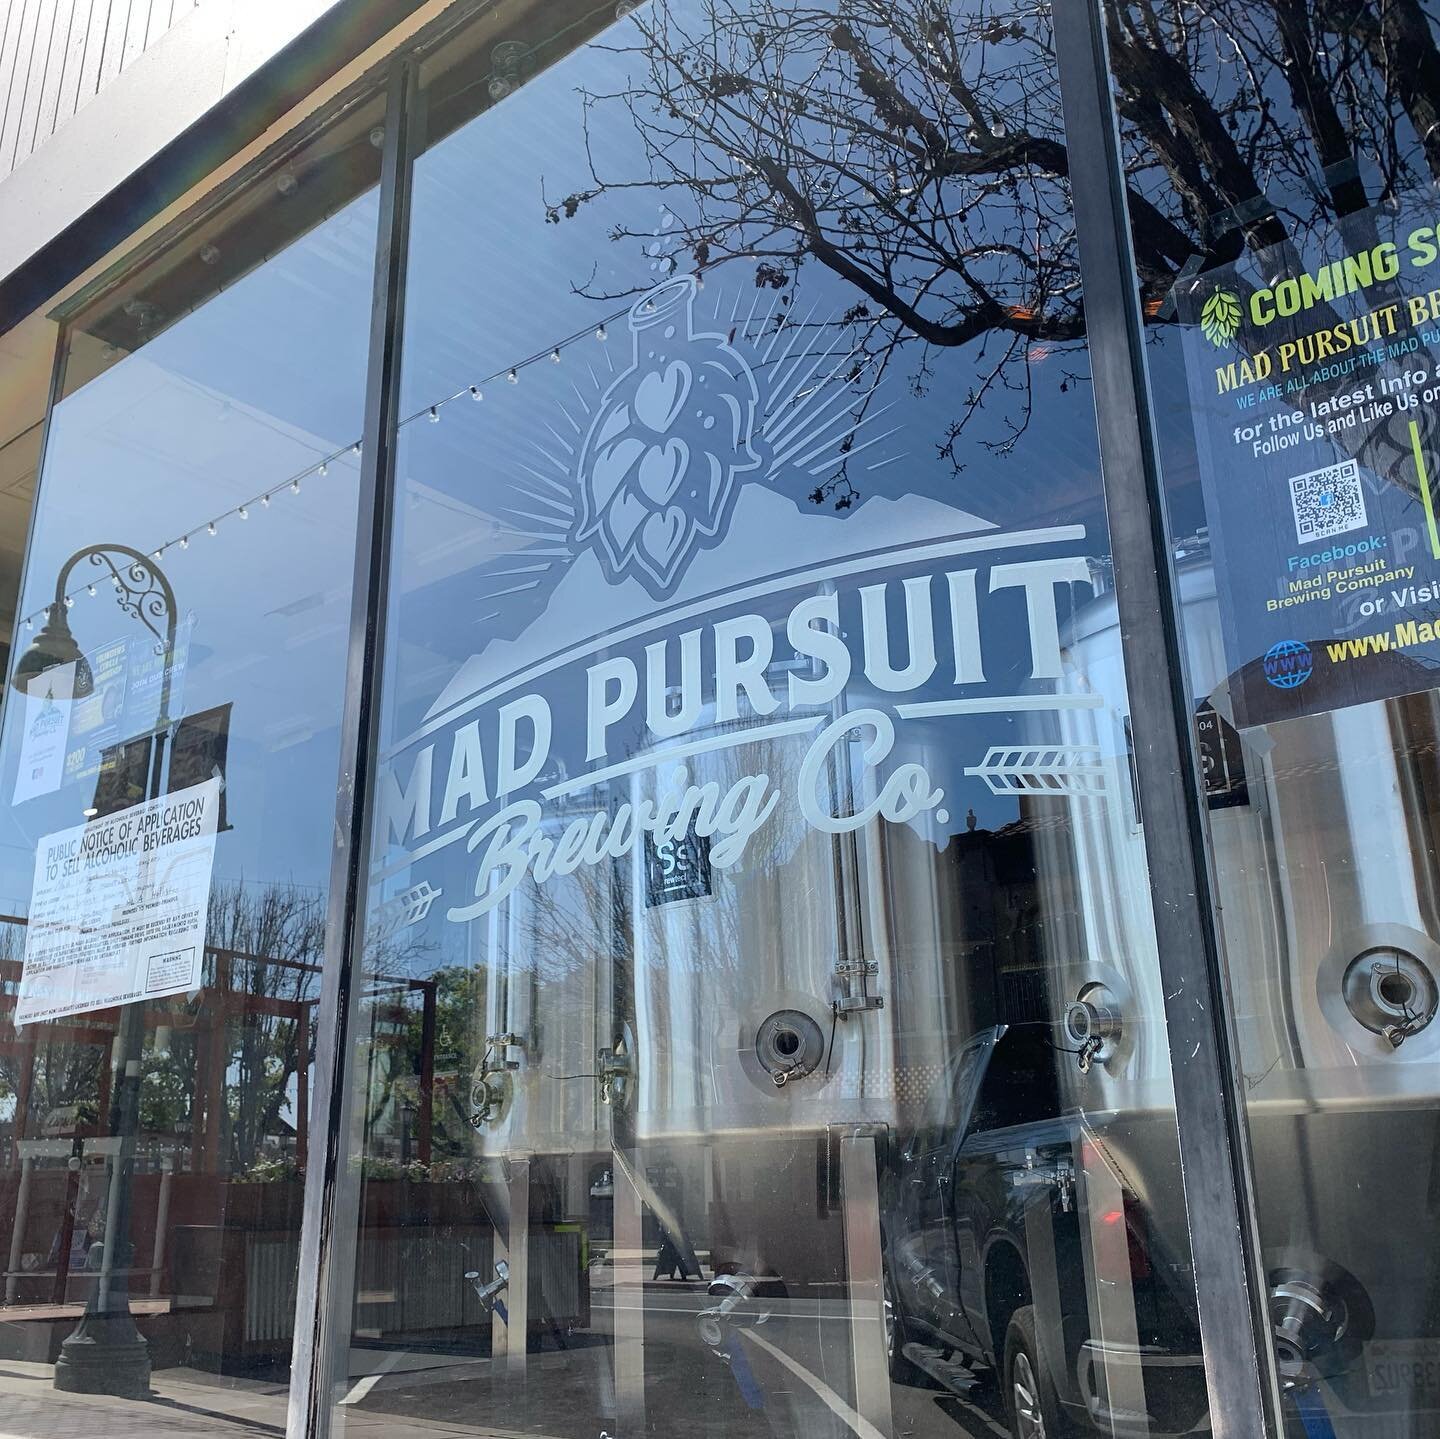 Frosted/etched window vinyl decoration for my friend @alex_madpursuitbrew and his team @madpursuitbrewing  info@CreativeGDS.com #frostedvinyl #etchedvinyl #graphicdesign #signanddesign